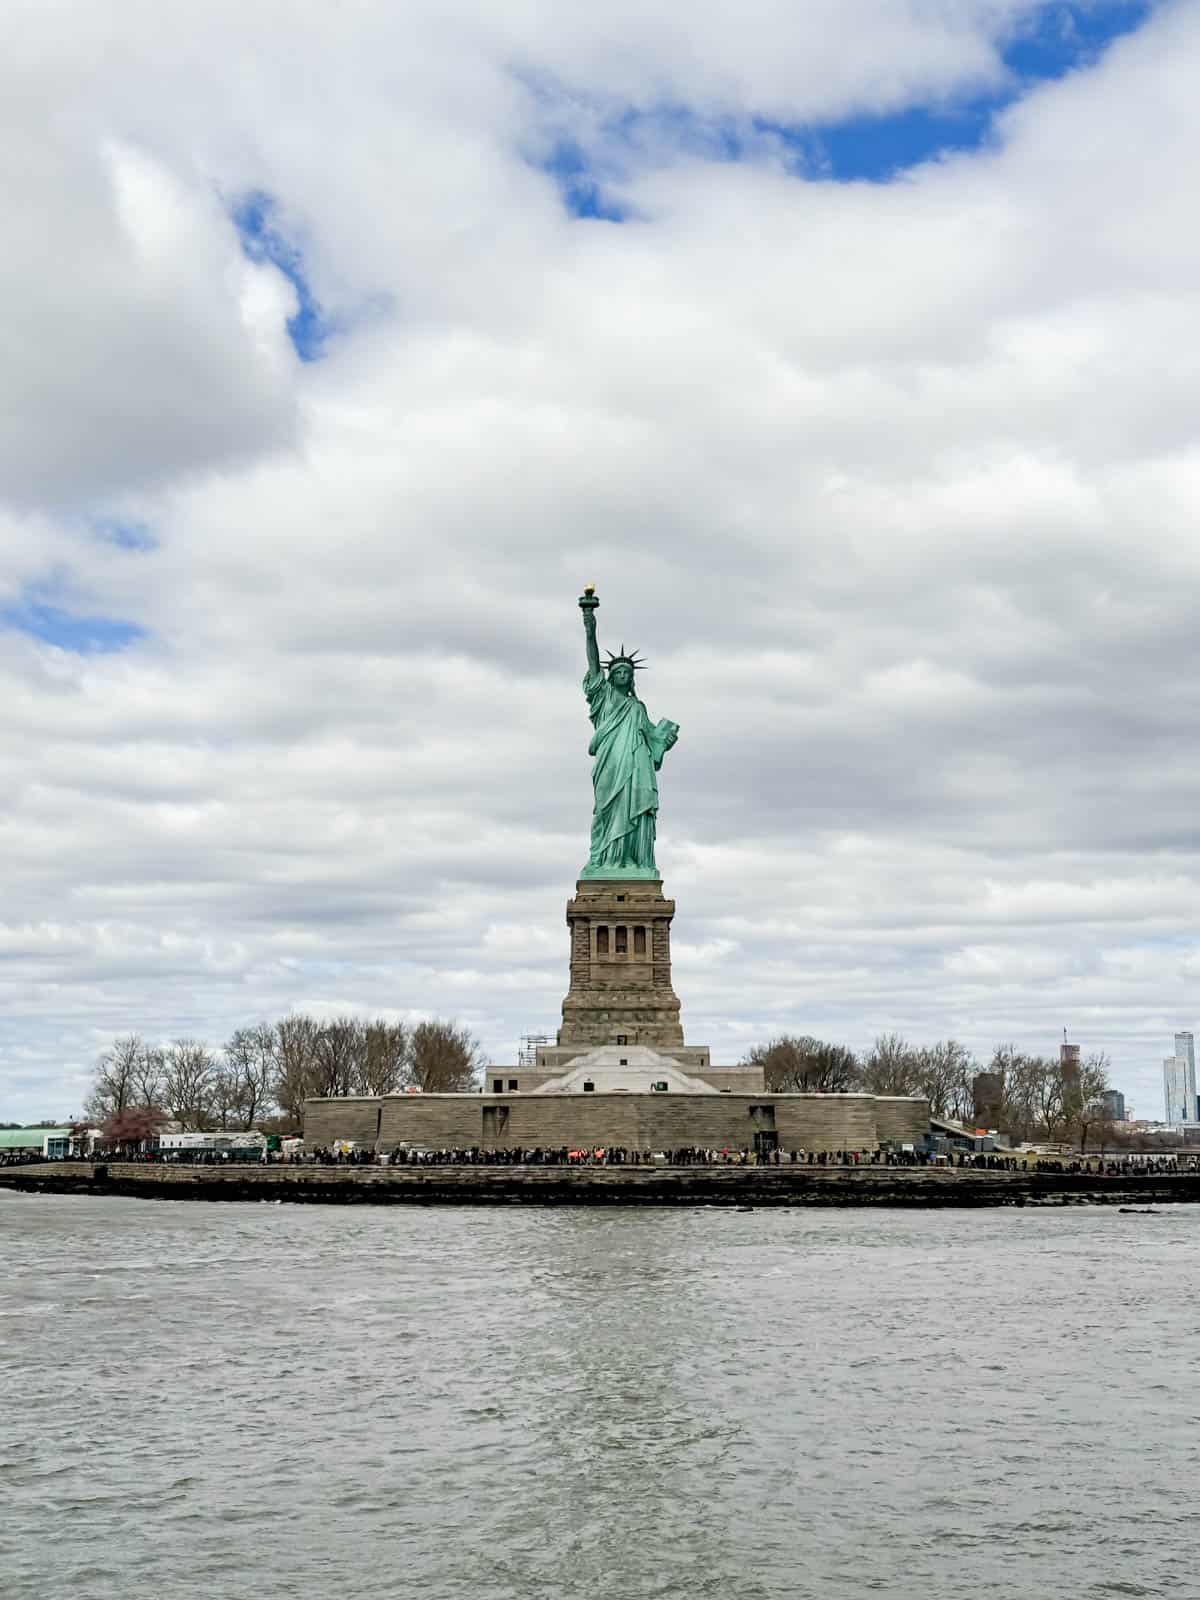 An image of the Statue of Liberty Island.